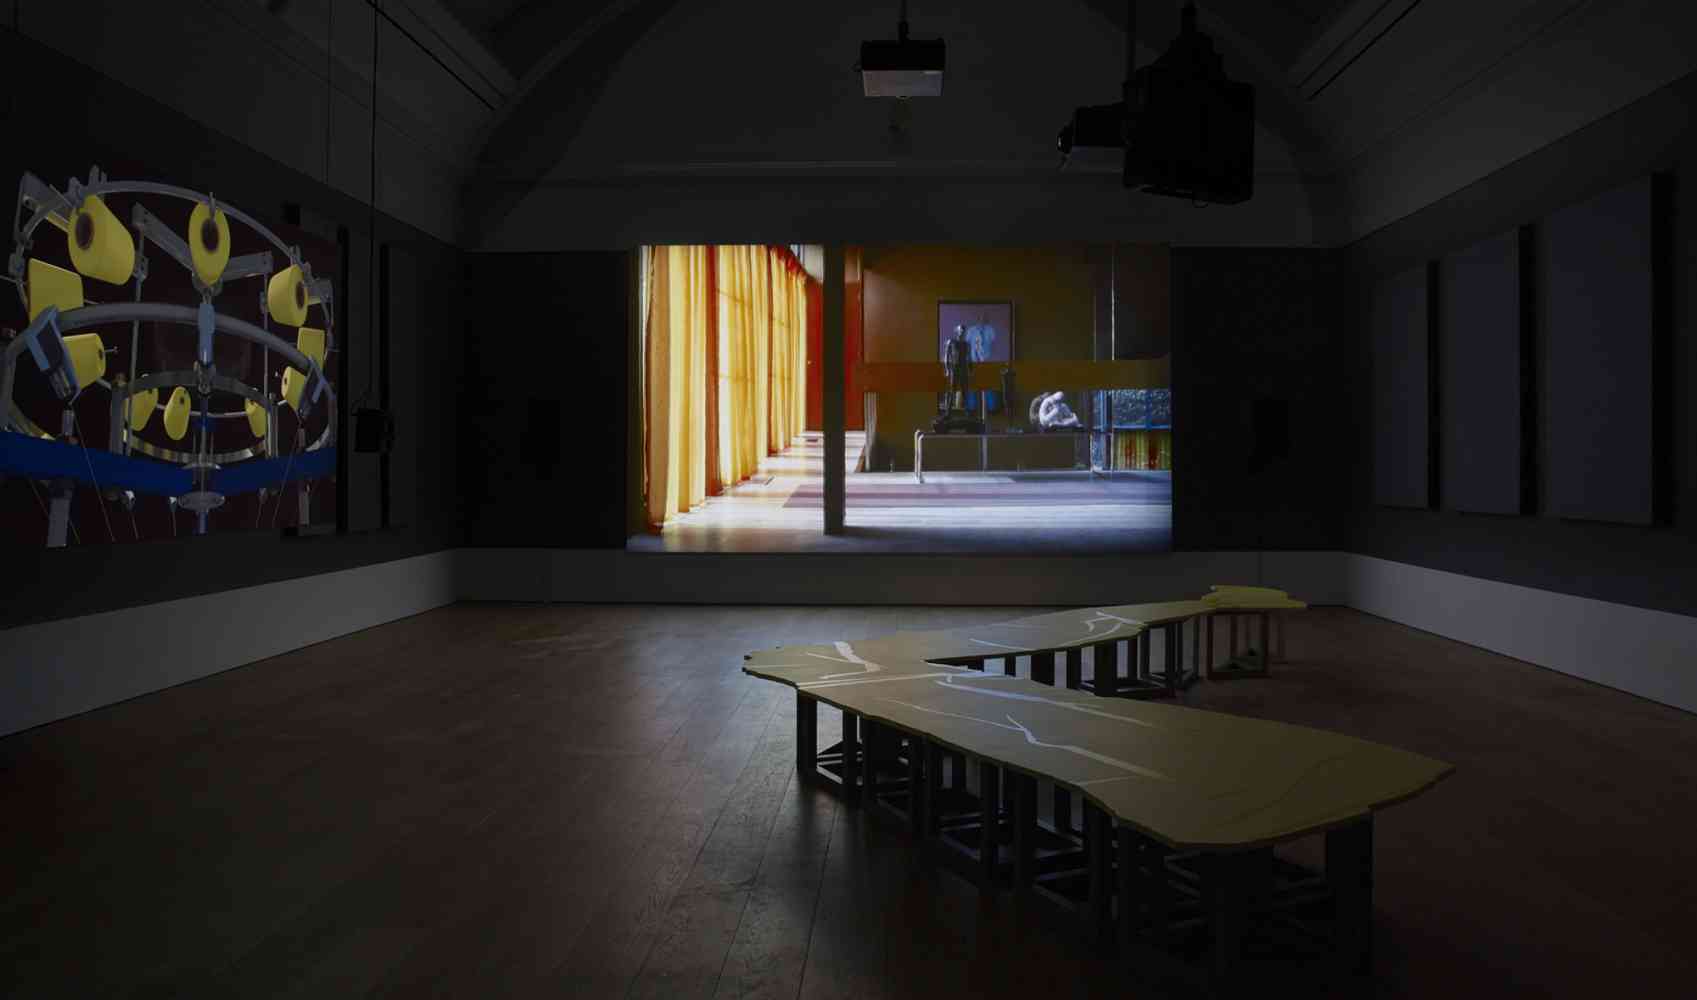 Photography by Michael Pollard Images courtesy of the artist and The Whitworth, The University of Manchester - AT THE HOUSE OF MR X_Installation view_A LONG MEMORY_The Whitworth_Manchester_UK_25Oct19-01Mar20